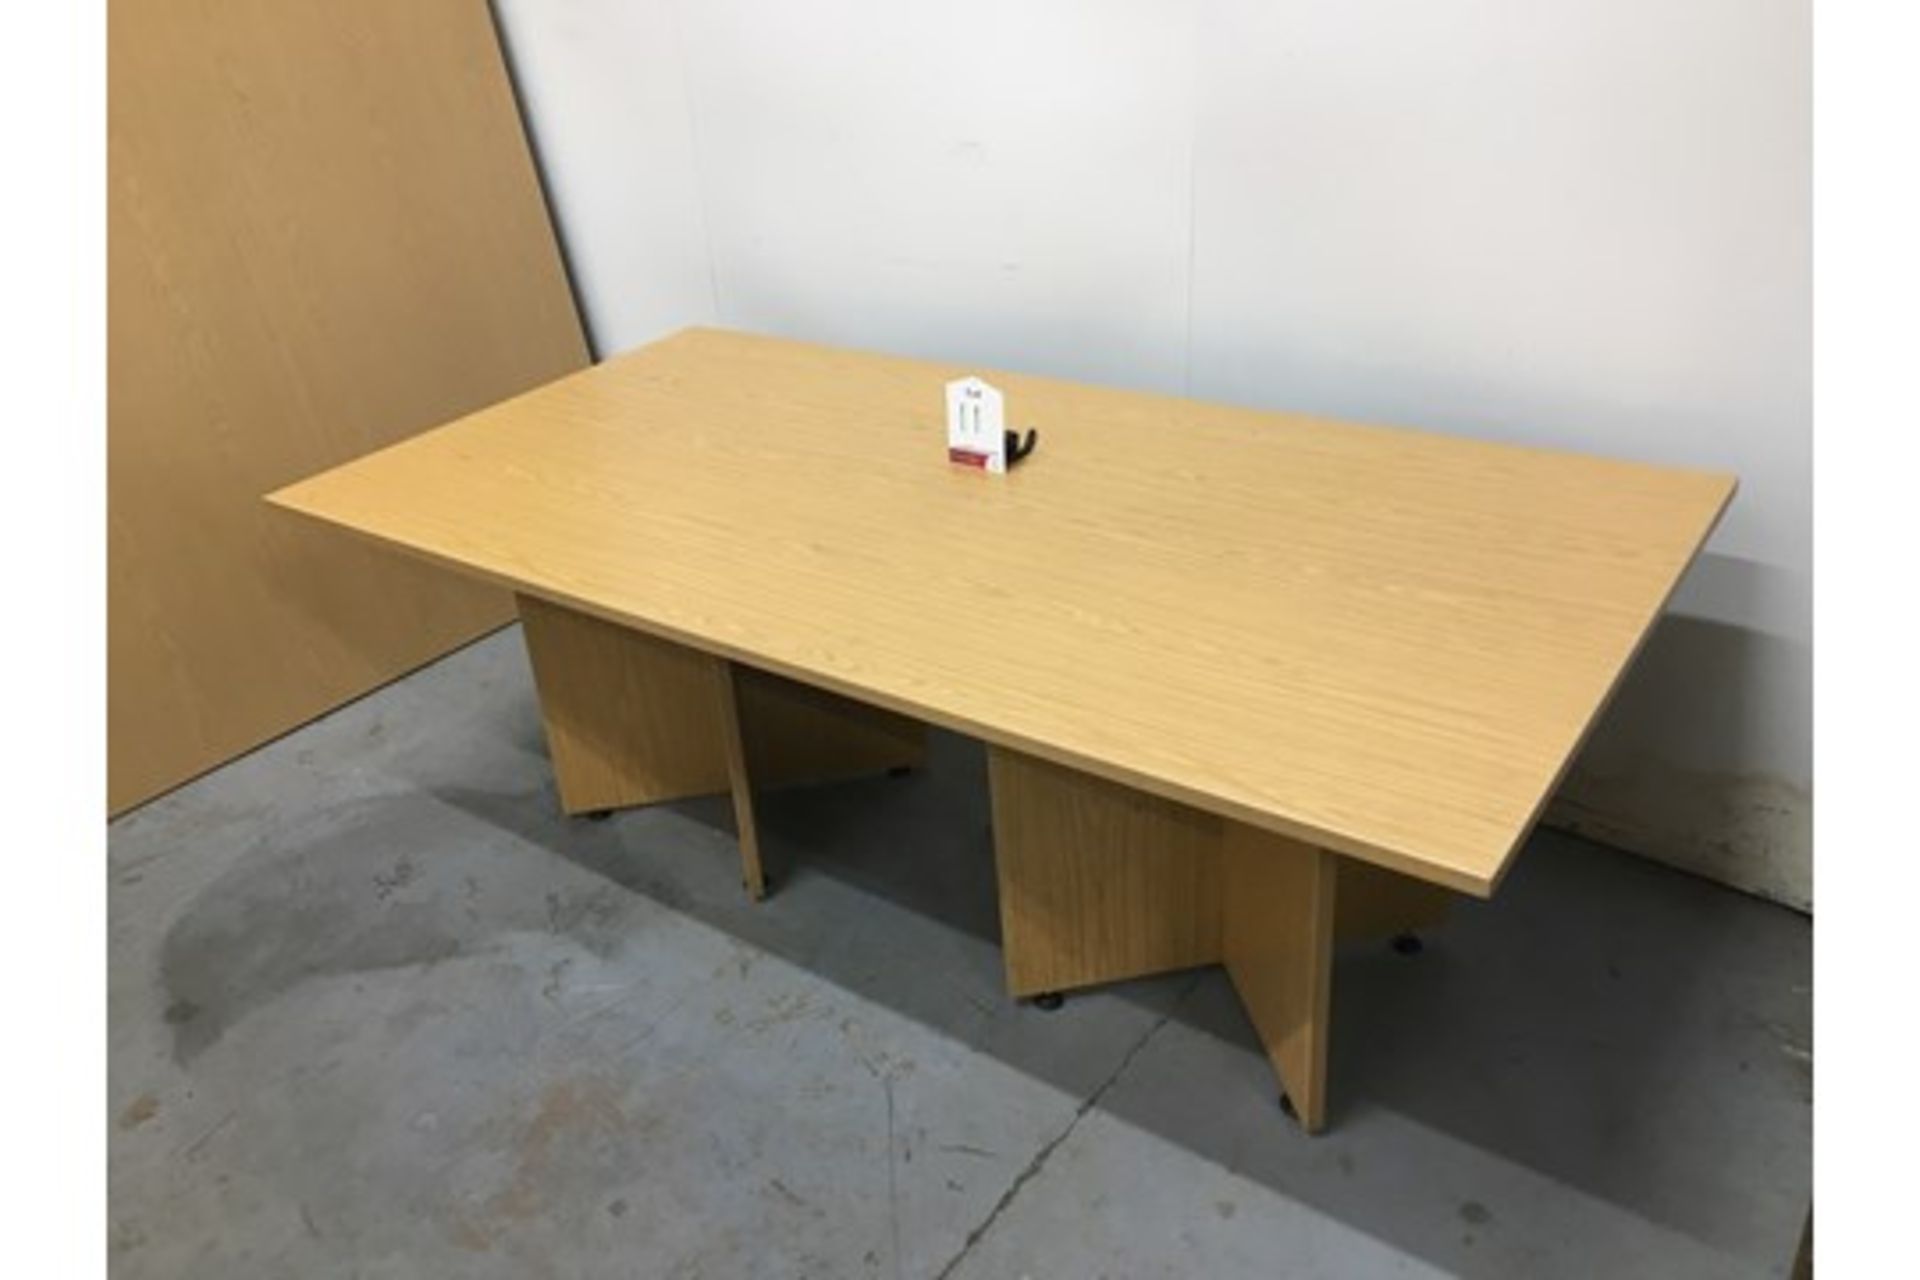 Office Desk in Light Oak Finish - L 2m x W 1m x H 70cm - Image 2 of 2